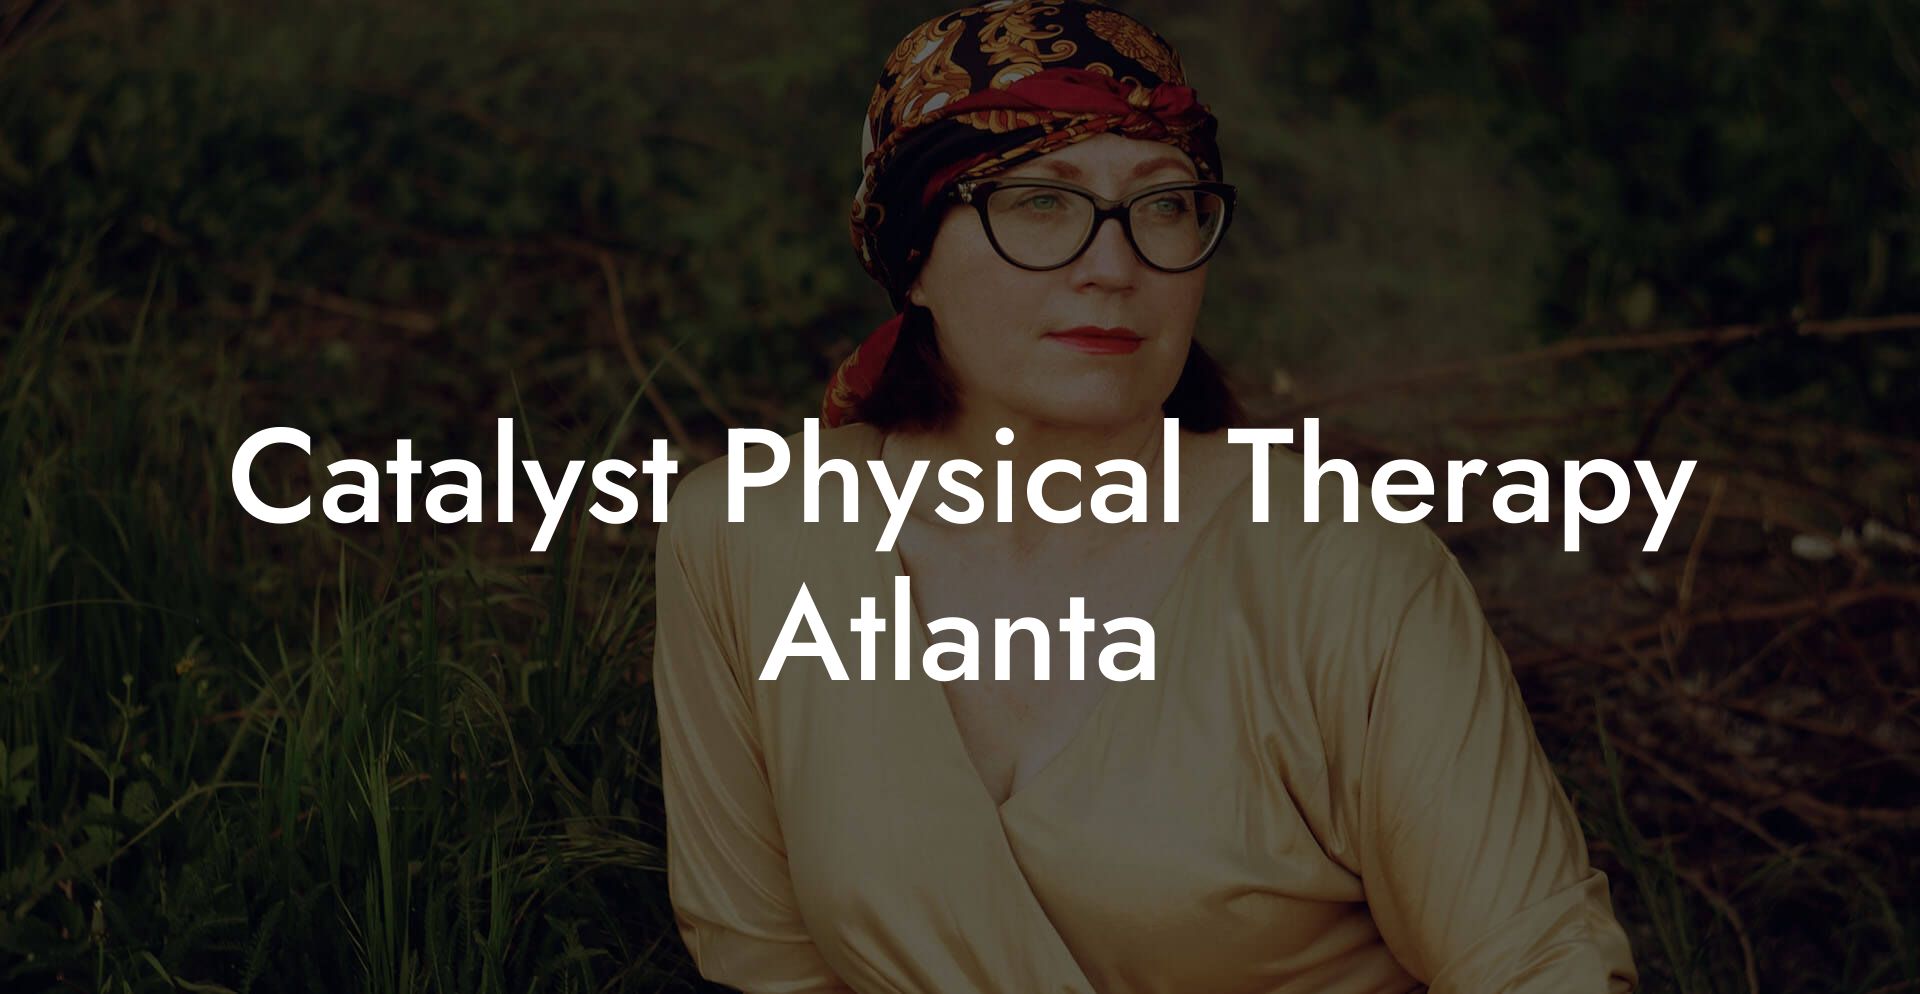 Catalyst Physical Therapy Atlanta